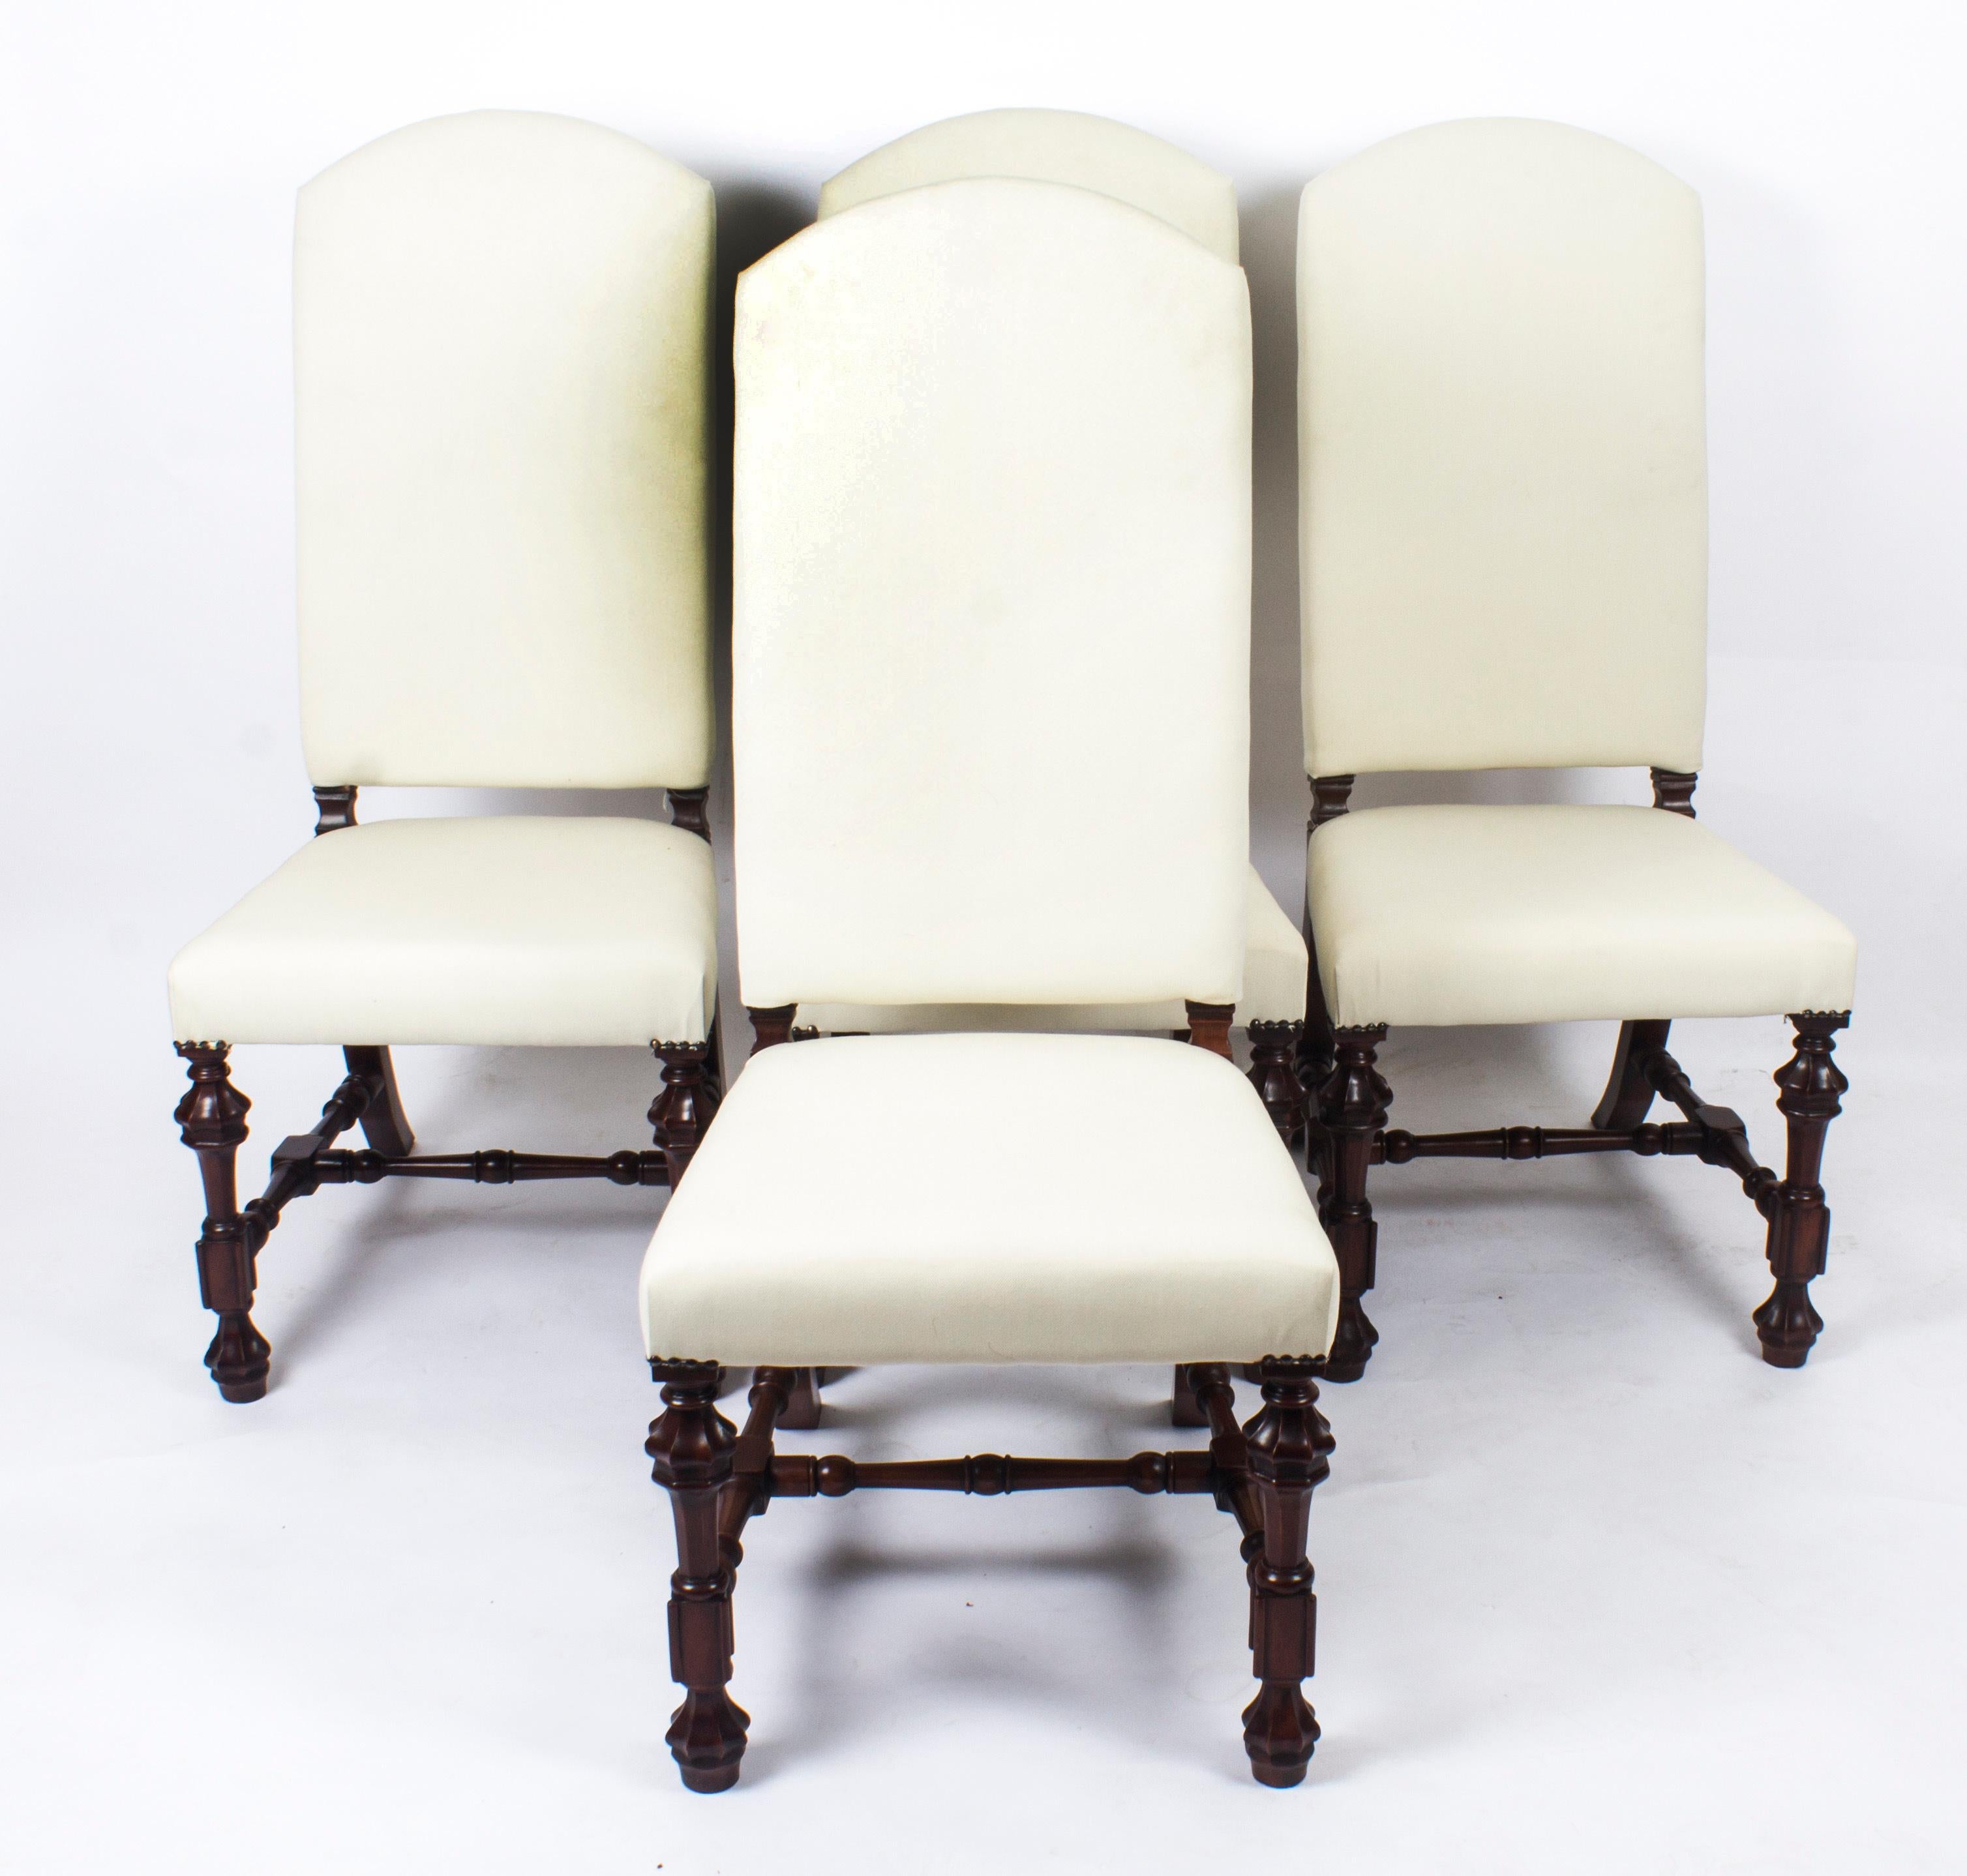 Vintage Pair of Carolean Style Upholstered High Back Dining Chairs, 20th Century For Sale 3